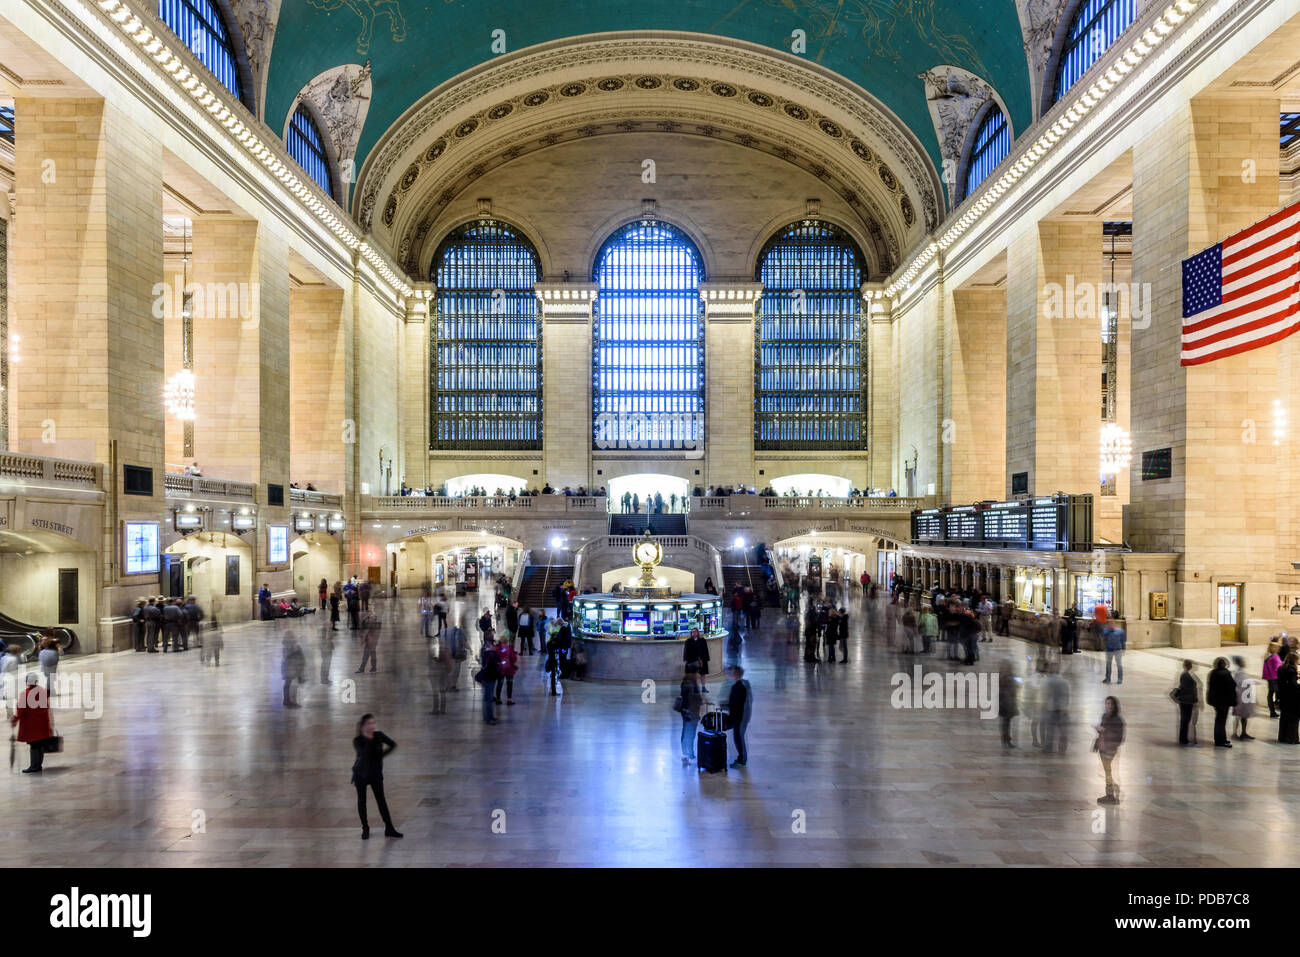 28-10-15, New York, USA. Grand Central Station. Photo : © Simon Grosset Banque D'Images